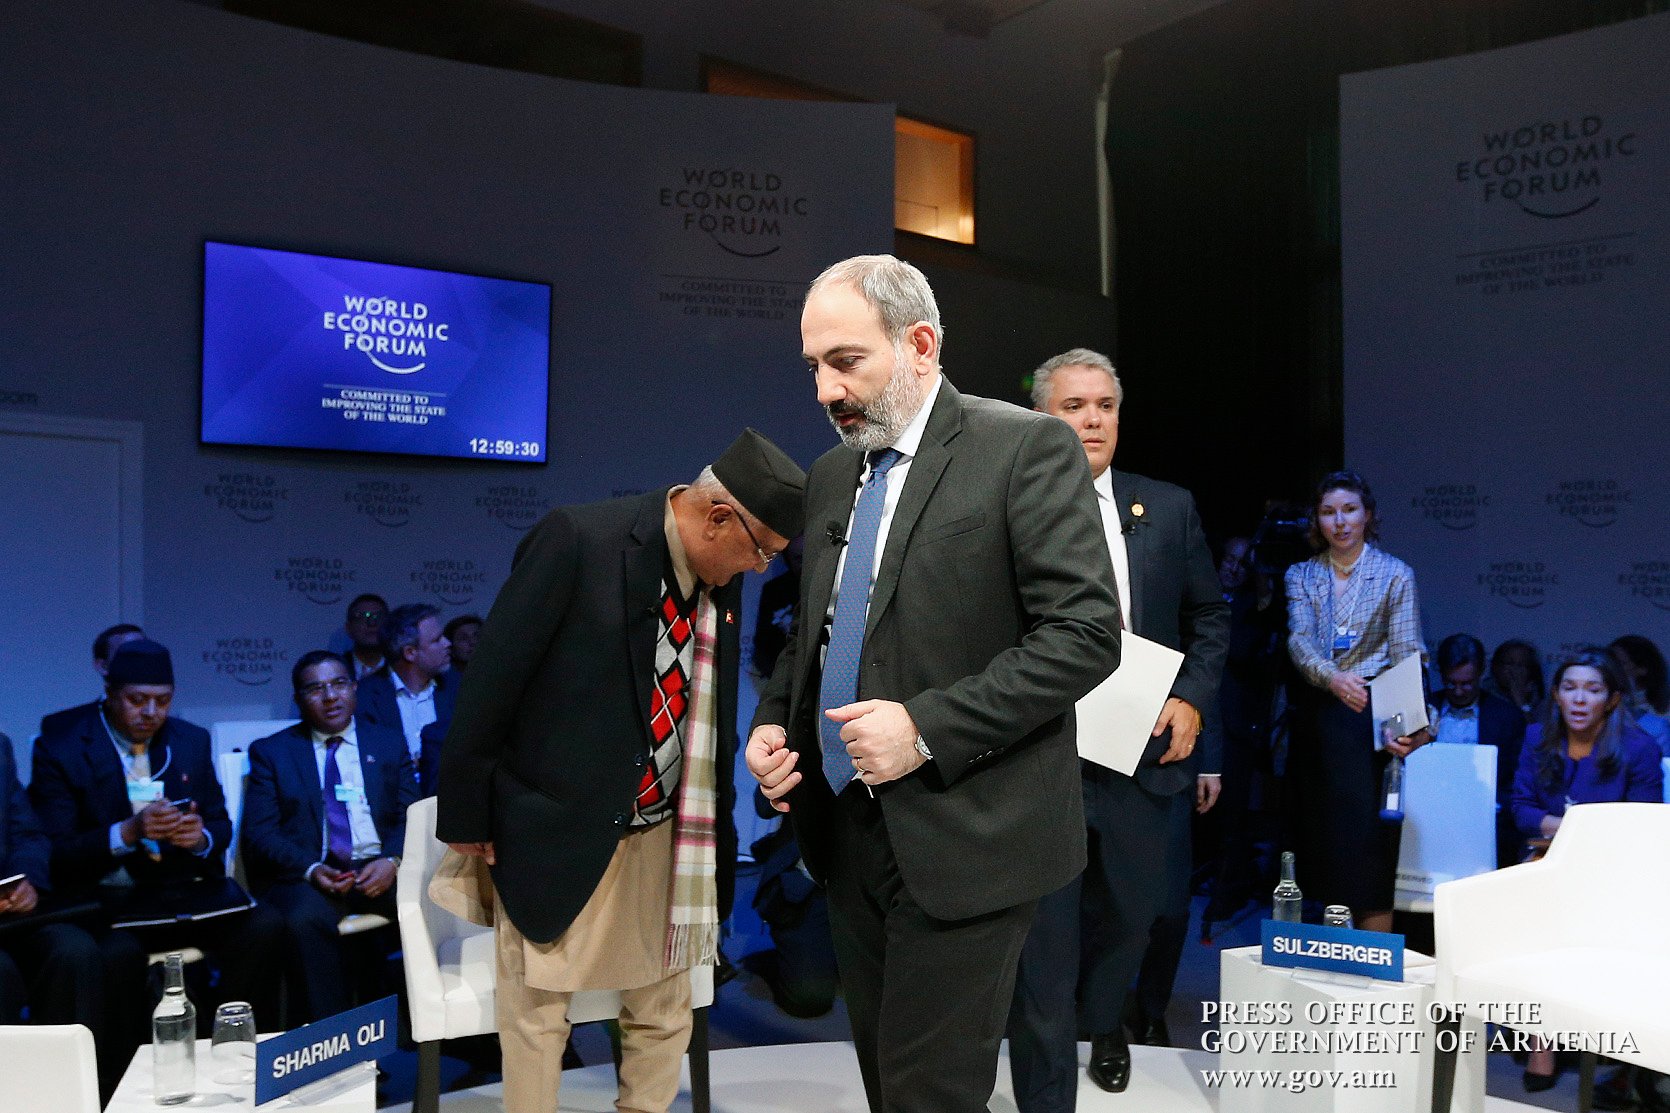 PM attends “Shaping the Future of Democracy” panel discussion in Davos